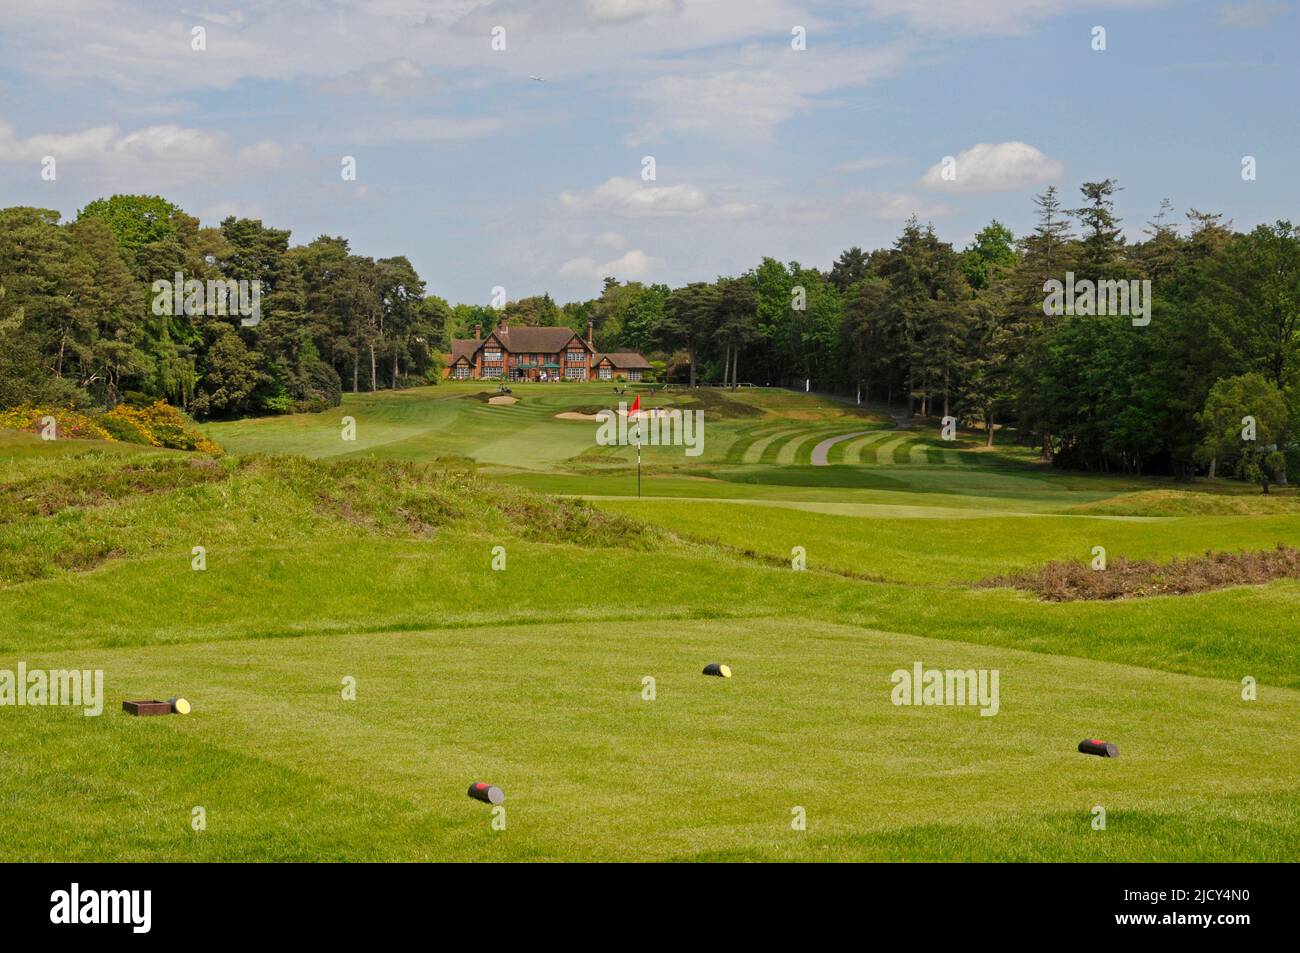 View over 2nd tee to 1st Green and 18th Hole with Clubhouse in background, Swinley Forest Golf Club, Ascot, Berkshire, England Stock Photo